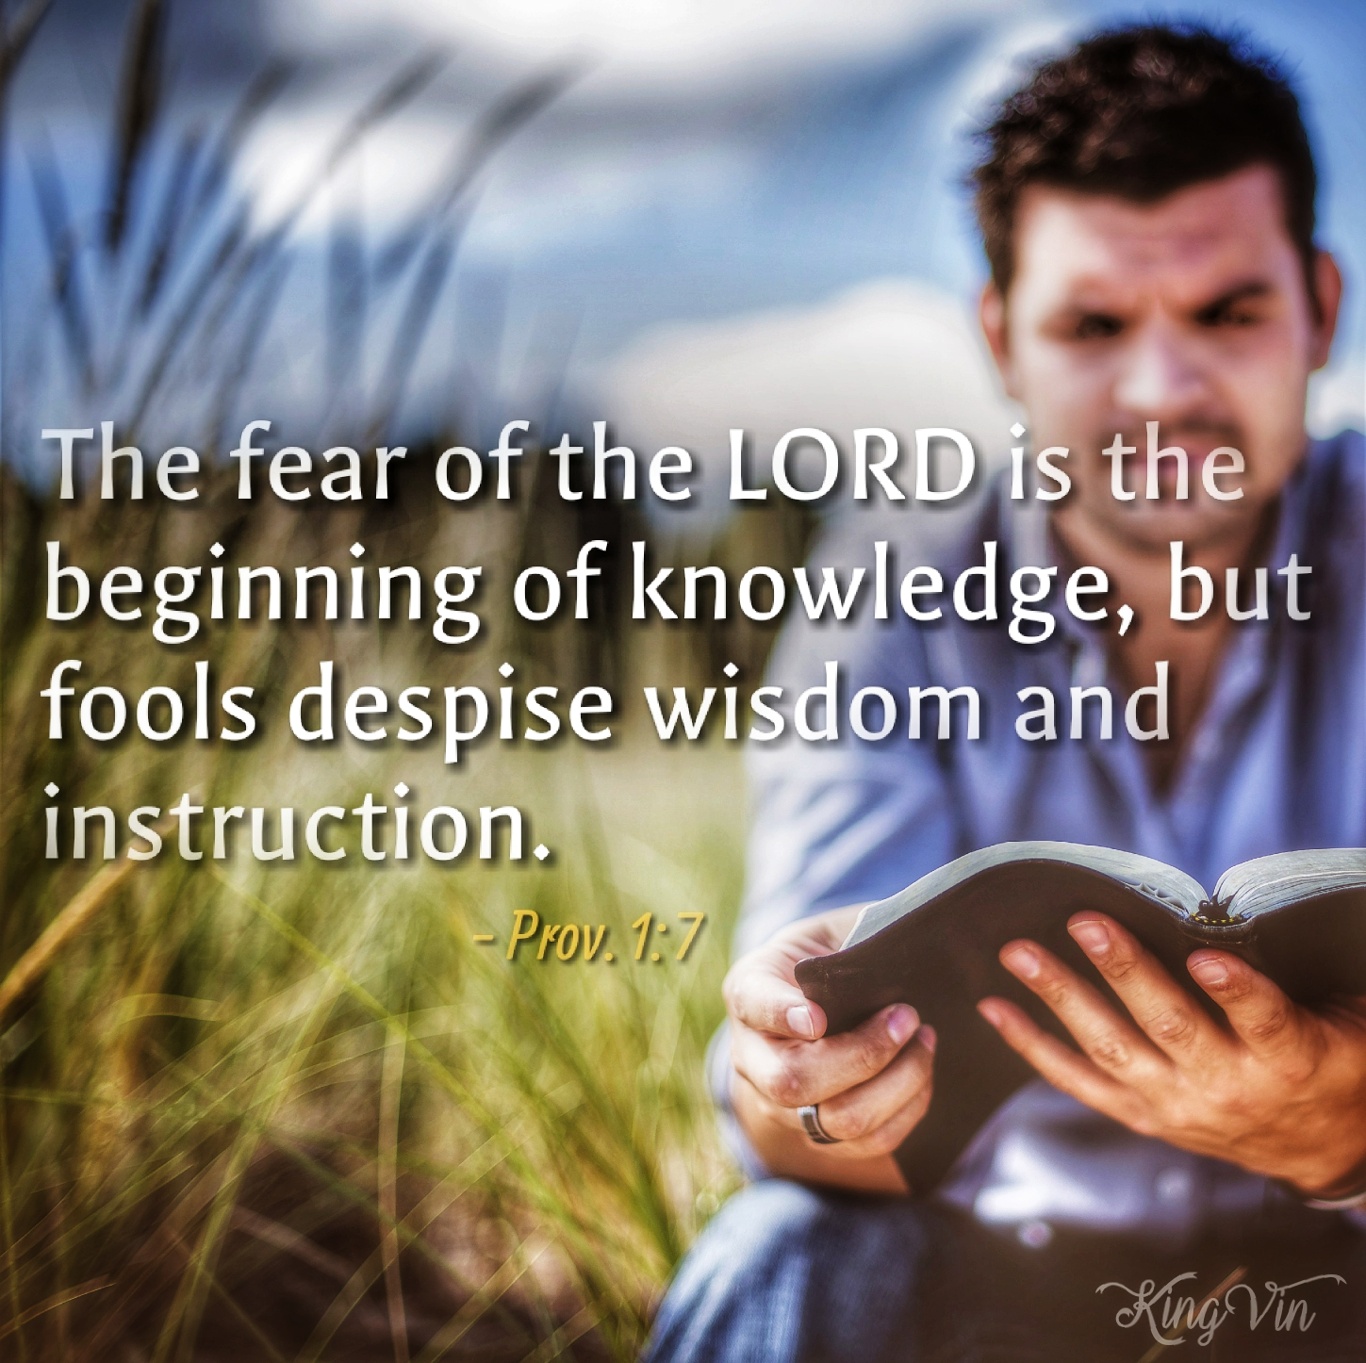 The fear of the Lord is the beginning of knowledge, but fools despise wisdom and instruction. Prov. 1:7